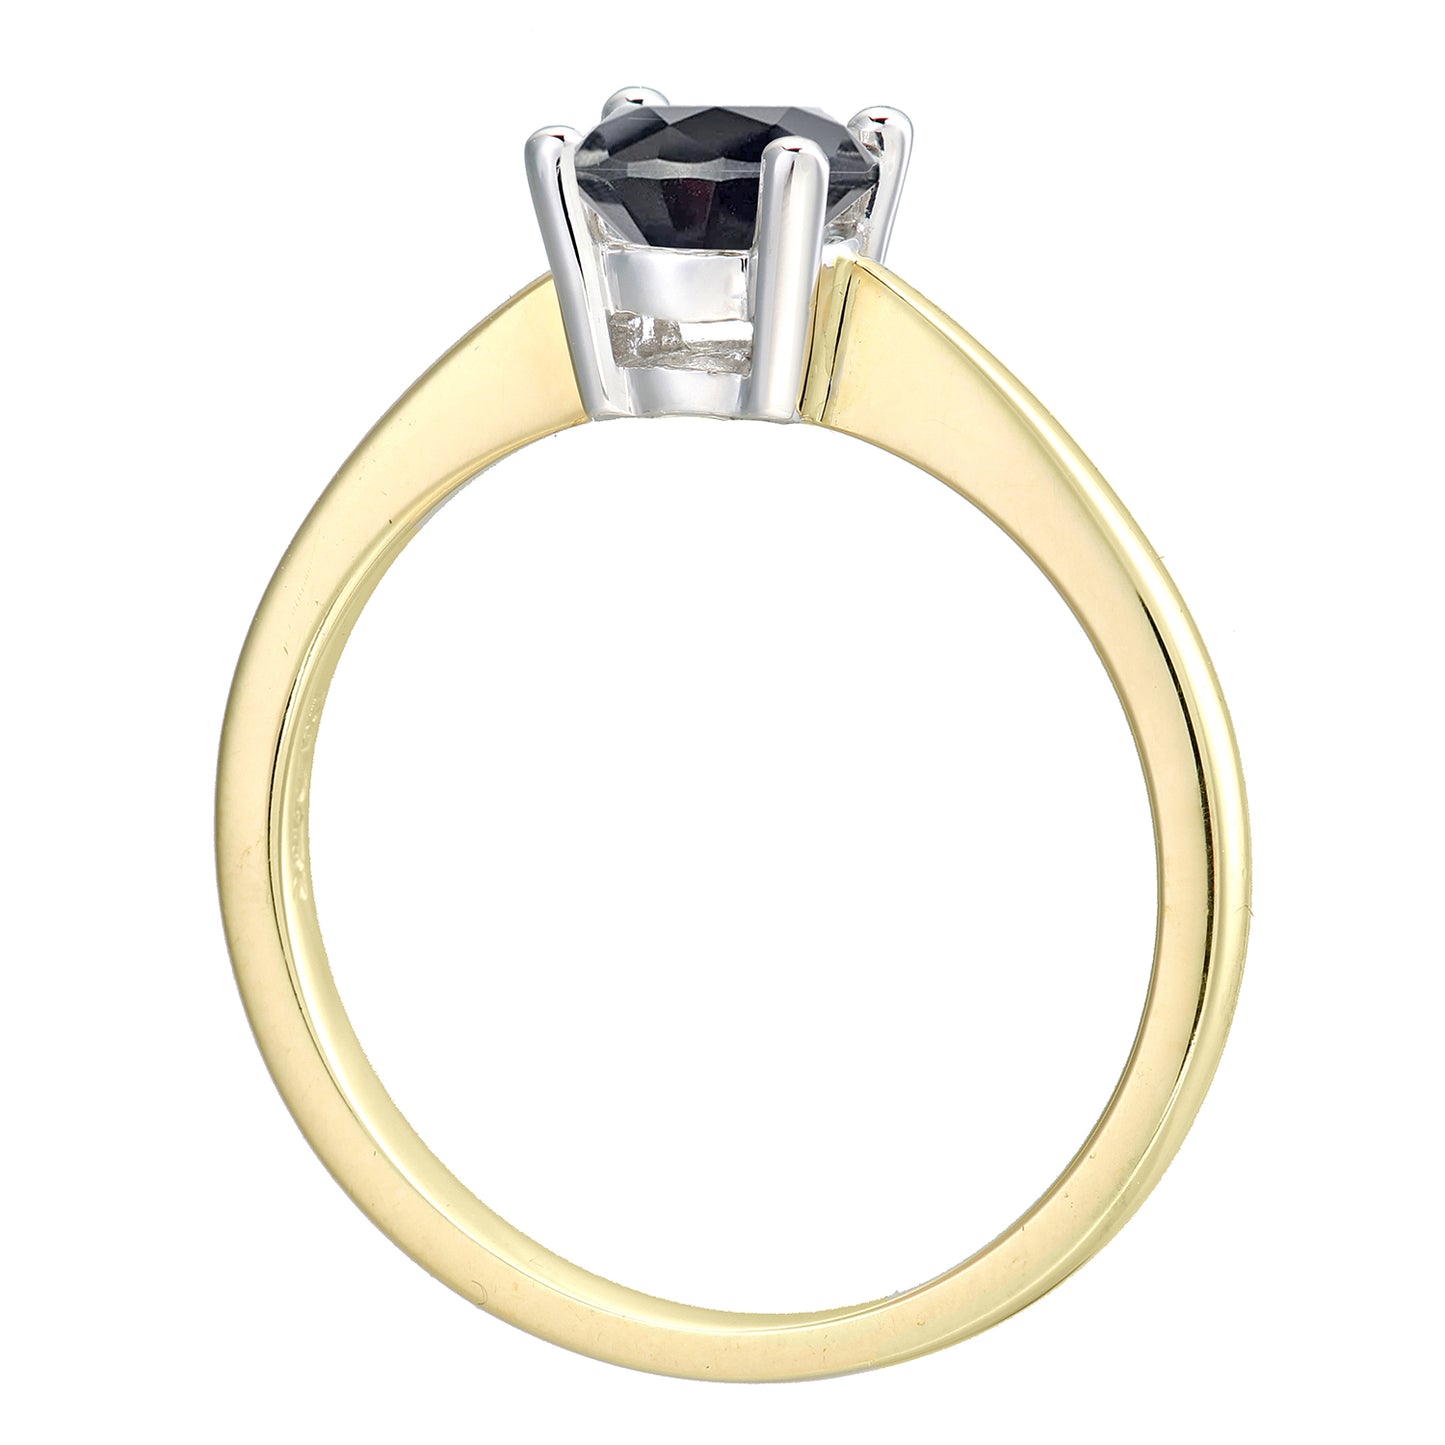 18ct Gold  Round 1ct Diamond 4 Claw Solitaire Engagement Ring - PR0AXL4689Y18BLK